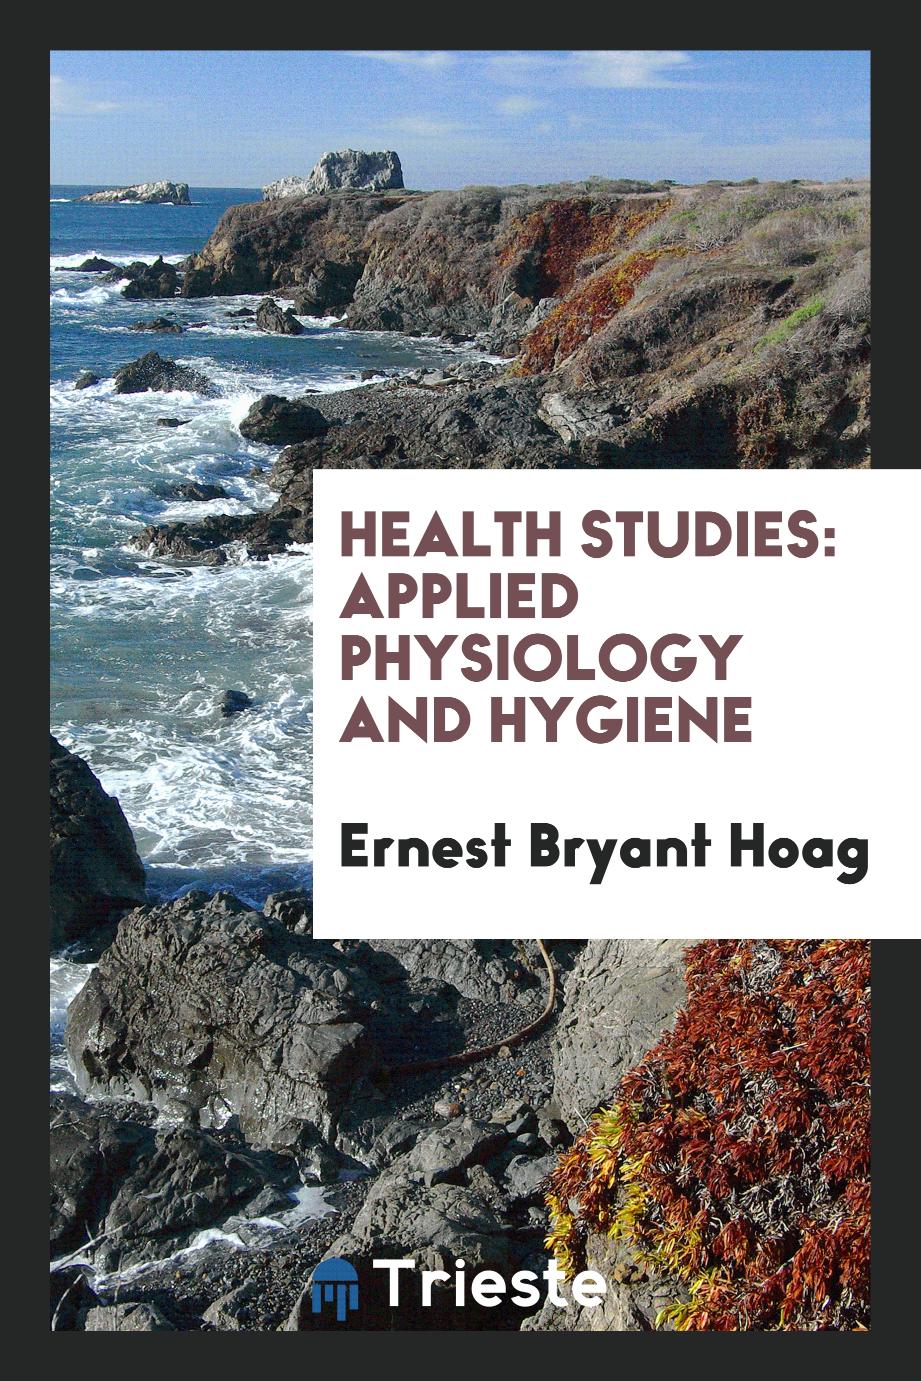 Health studies: applied physiology and hygiene